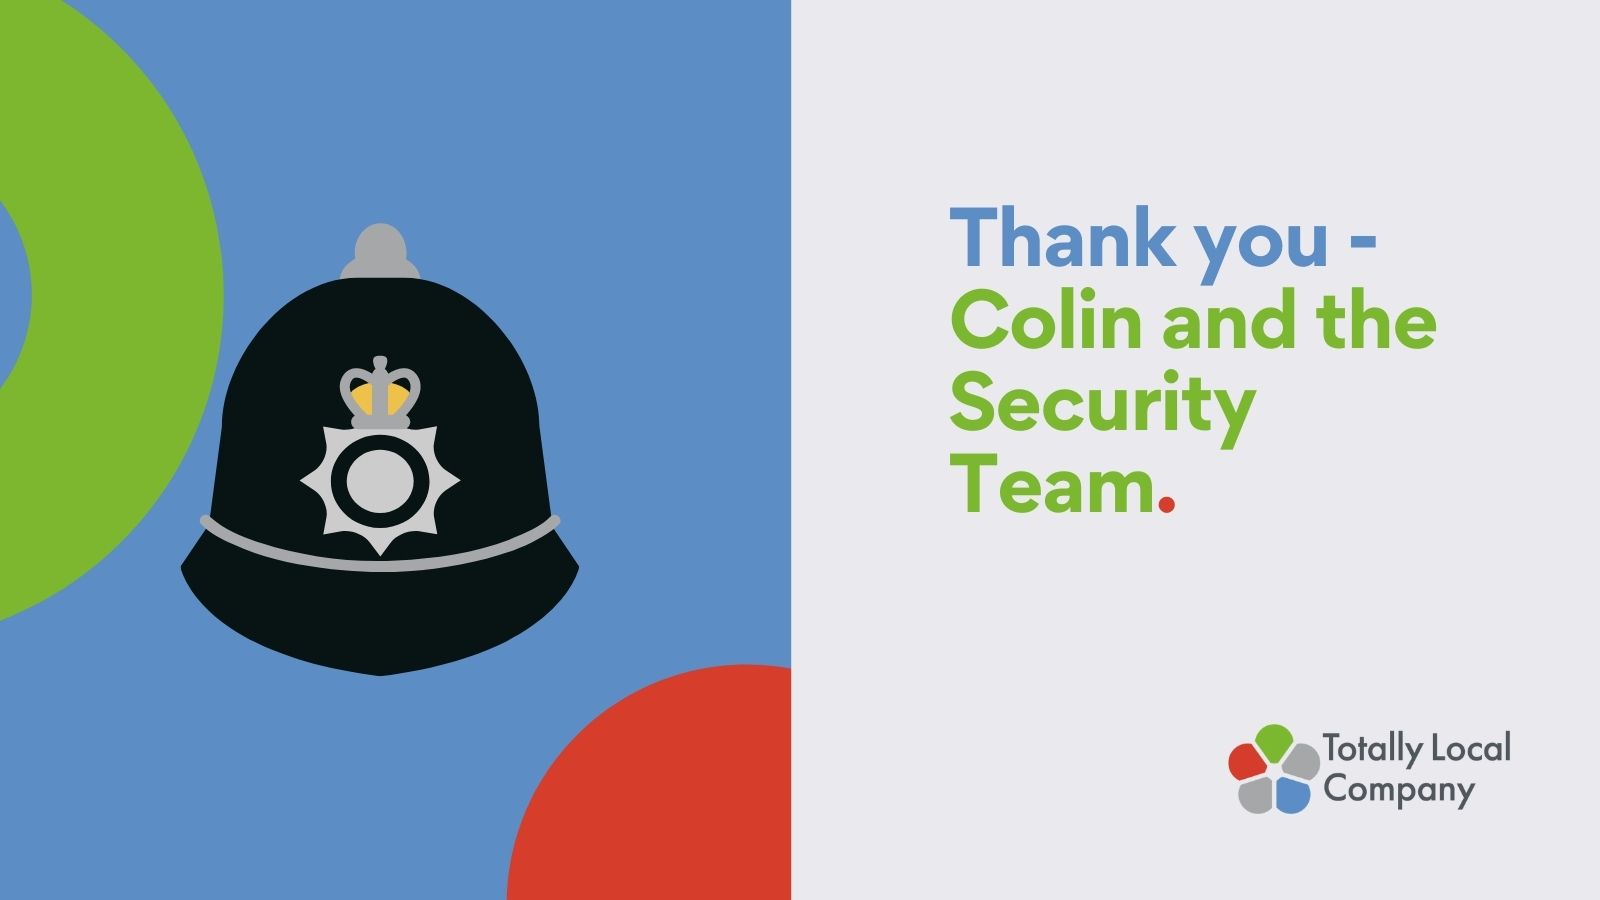 wording - thank you Colin and the Security Team, image is of a old-fashioned police hat